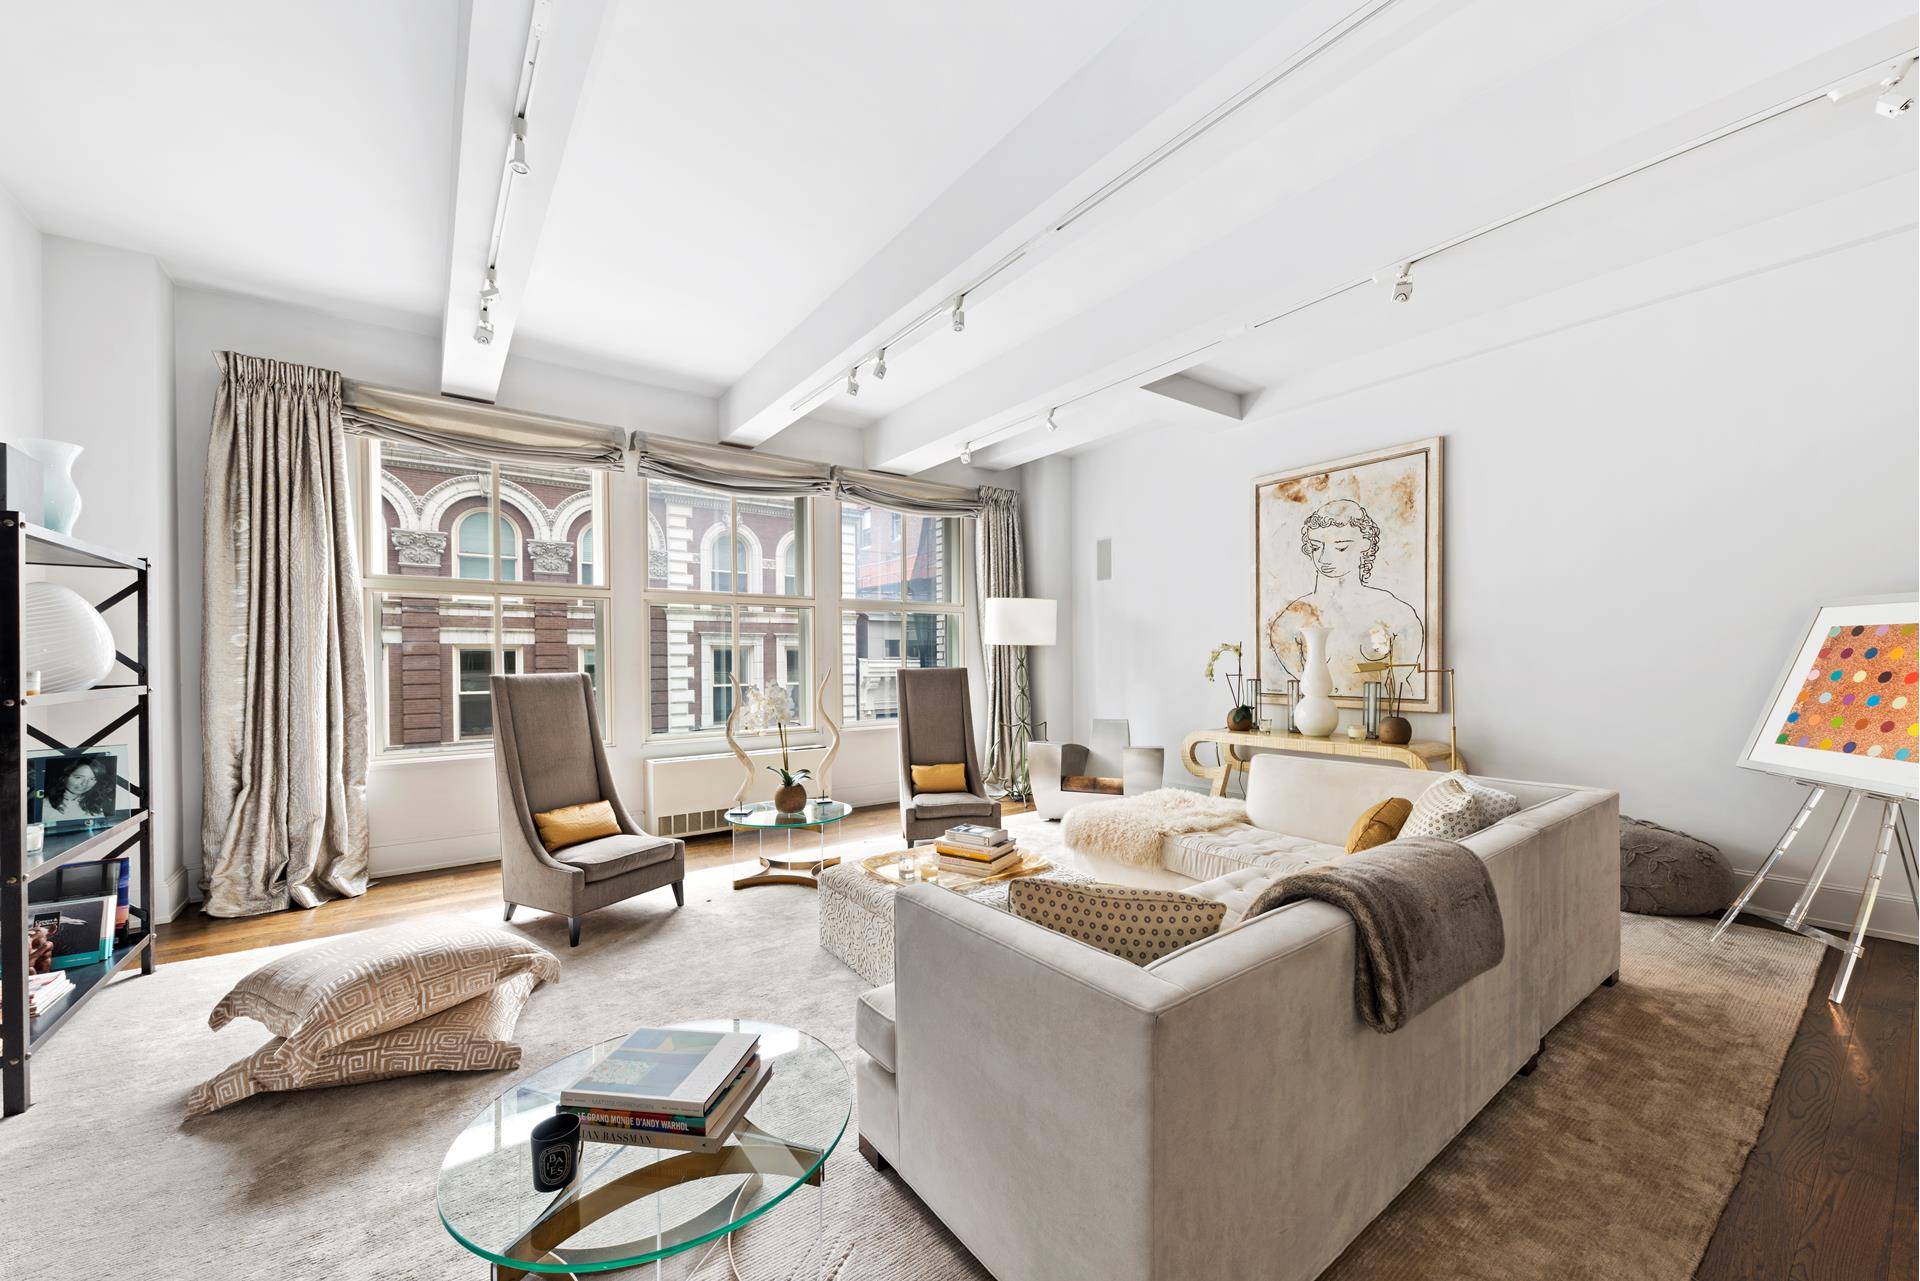 Exquisite duplex loft spanning approximately 2, 525 square feet of space offers 2 bedrooms, 2.